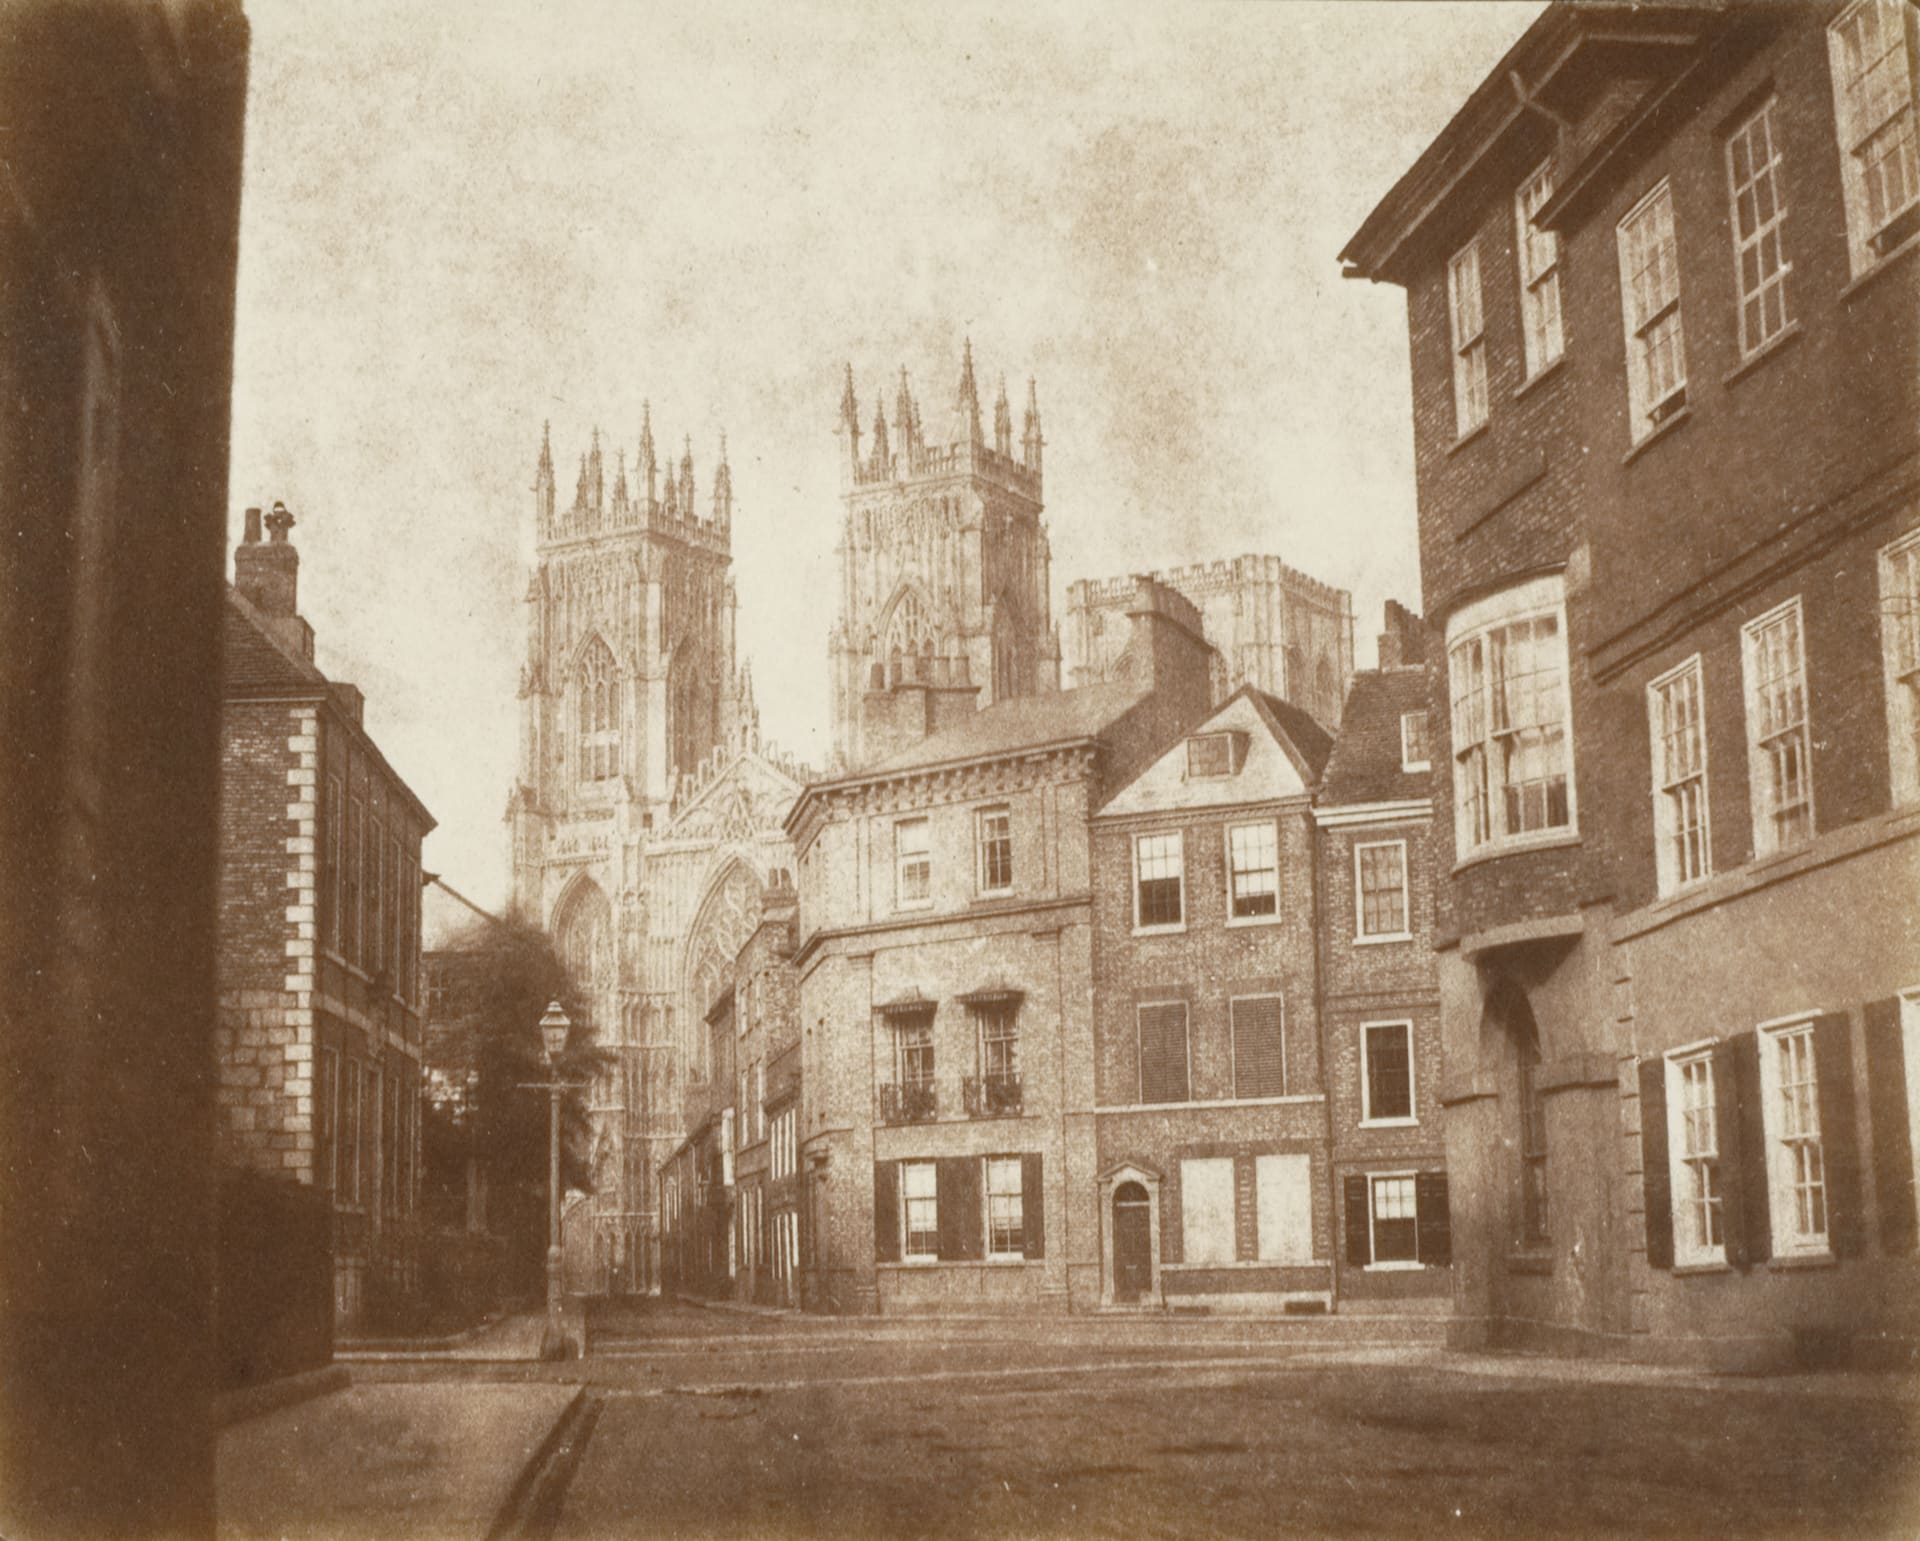 a sepia-toned photograph of a city view with a two-towered church